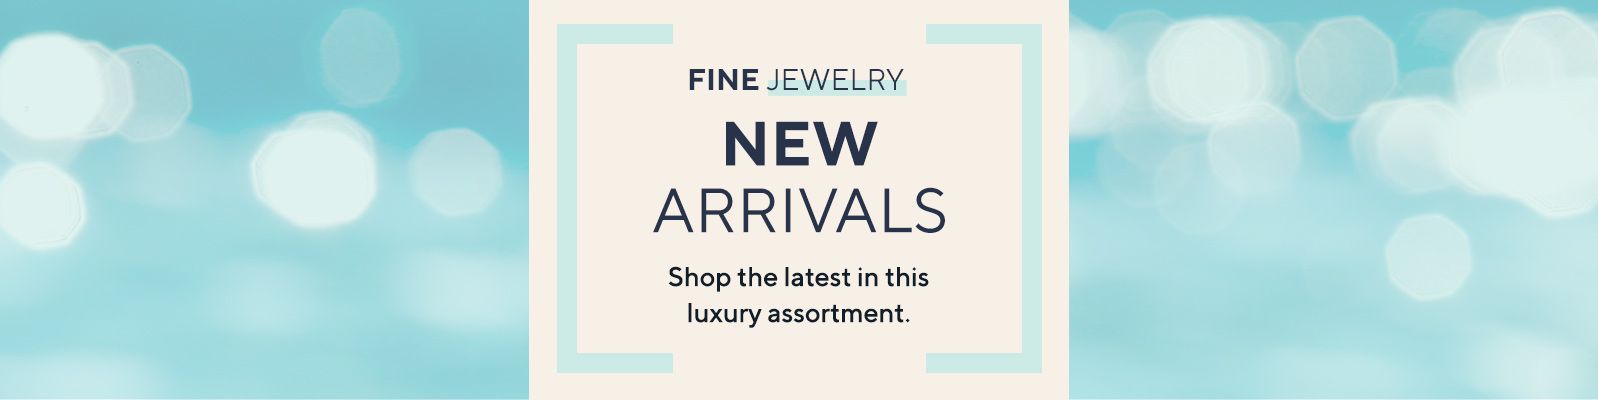 Fine Jewelry - New Arrivals - Shop the latest in this luxury assortment.